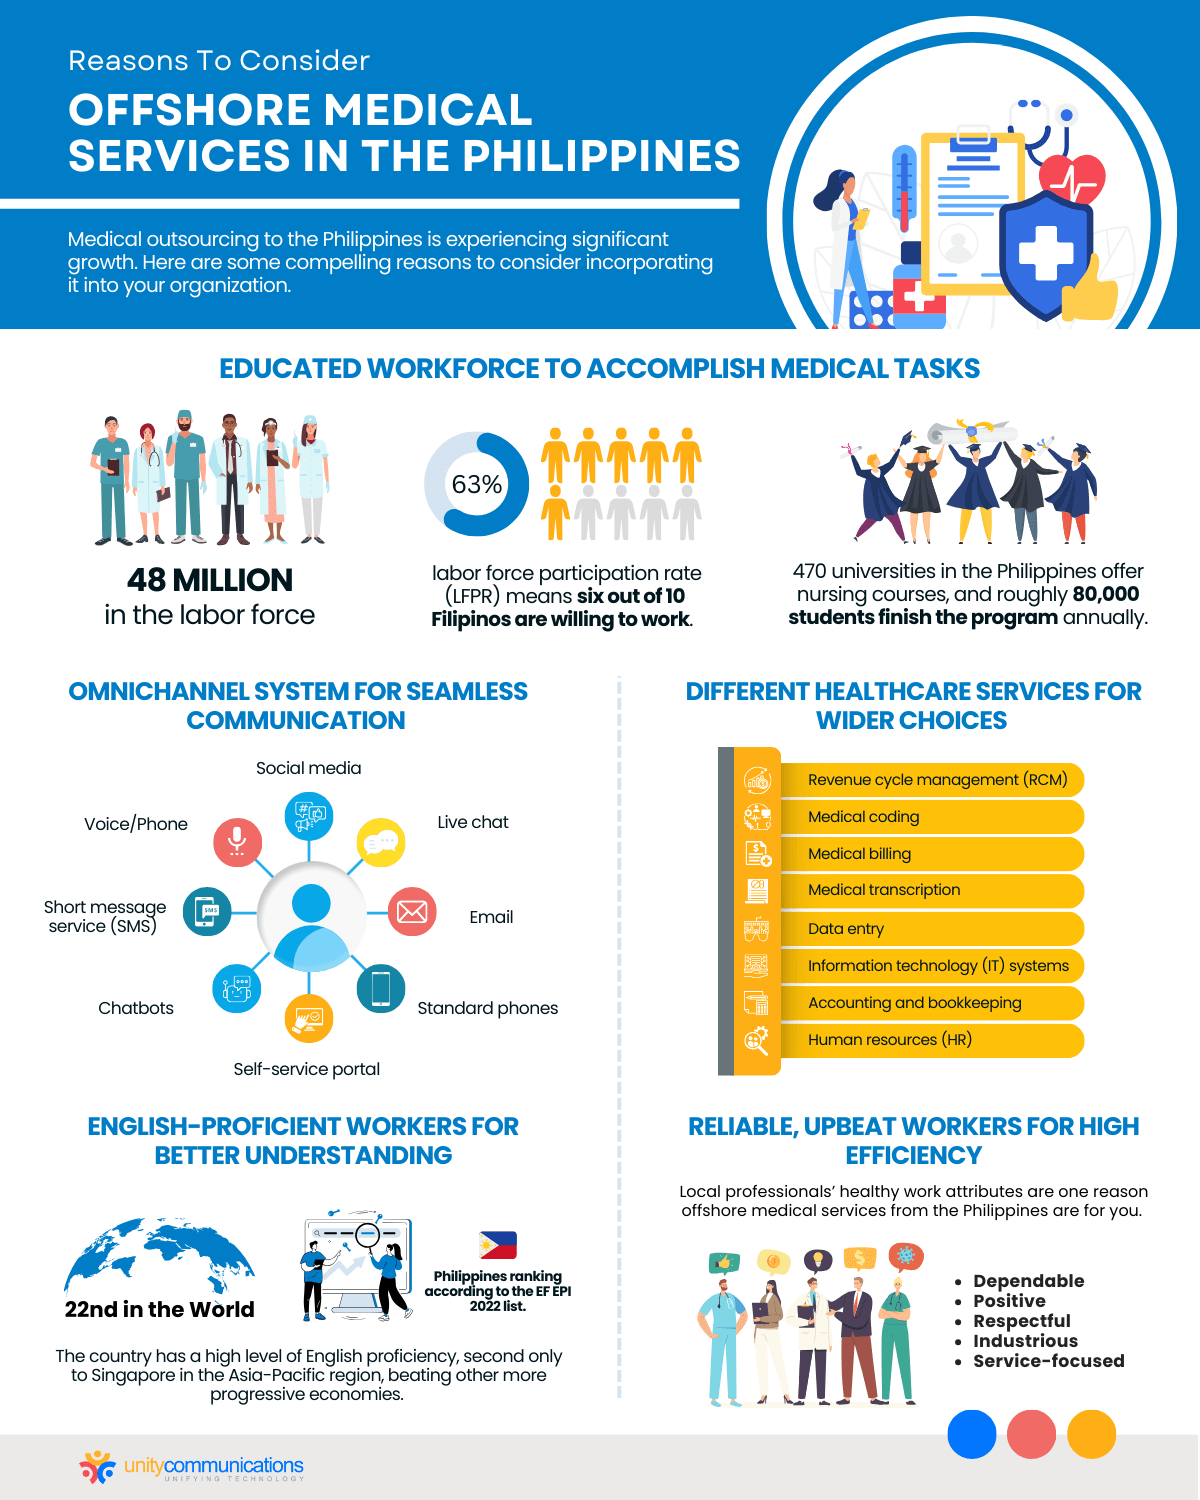 Reasons To Consider Offshore Medical Services in the Philippines